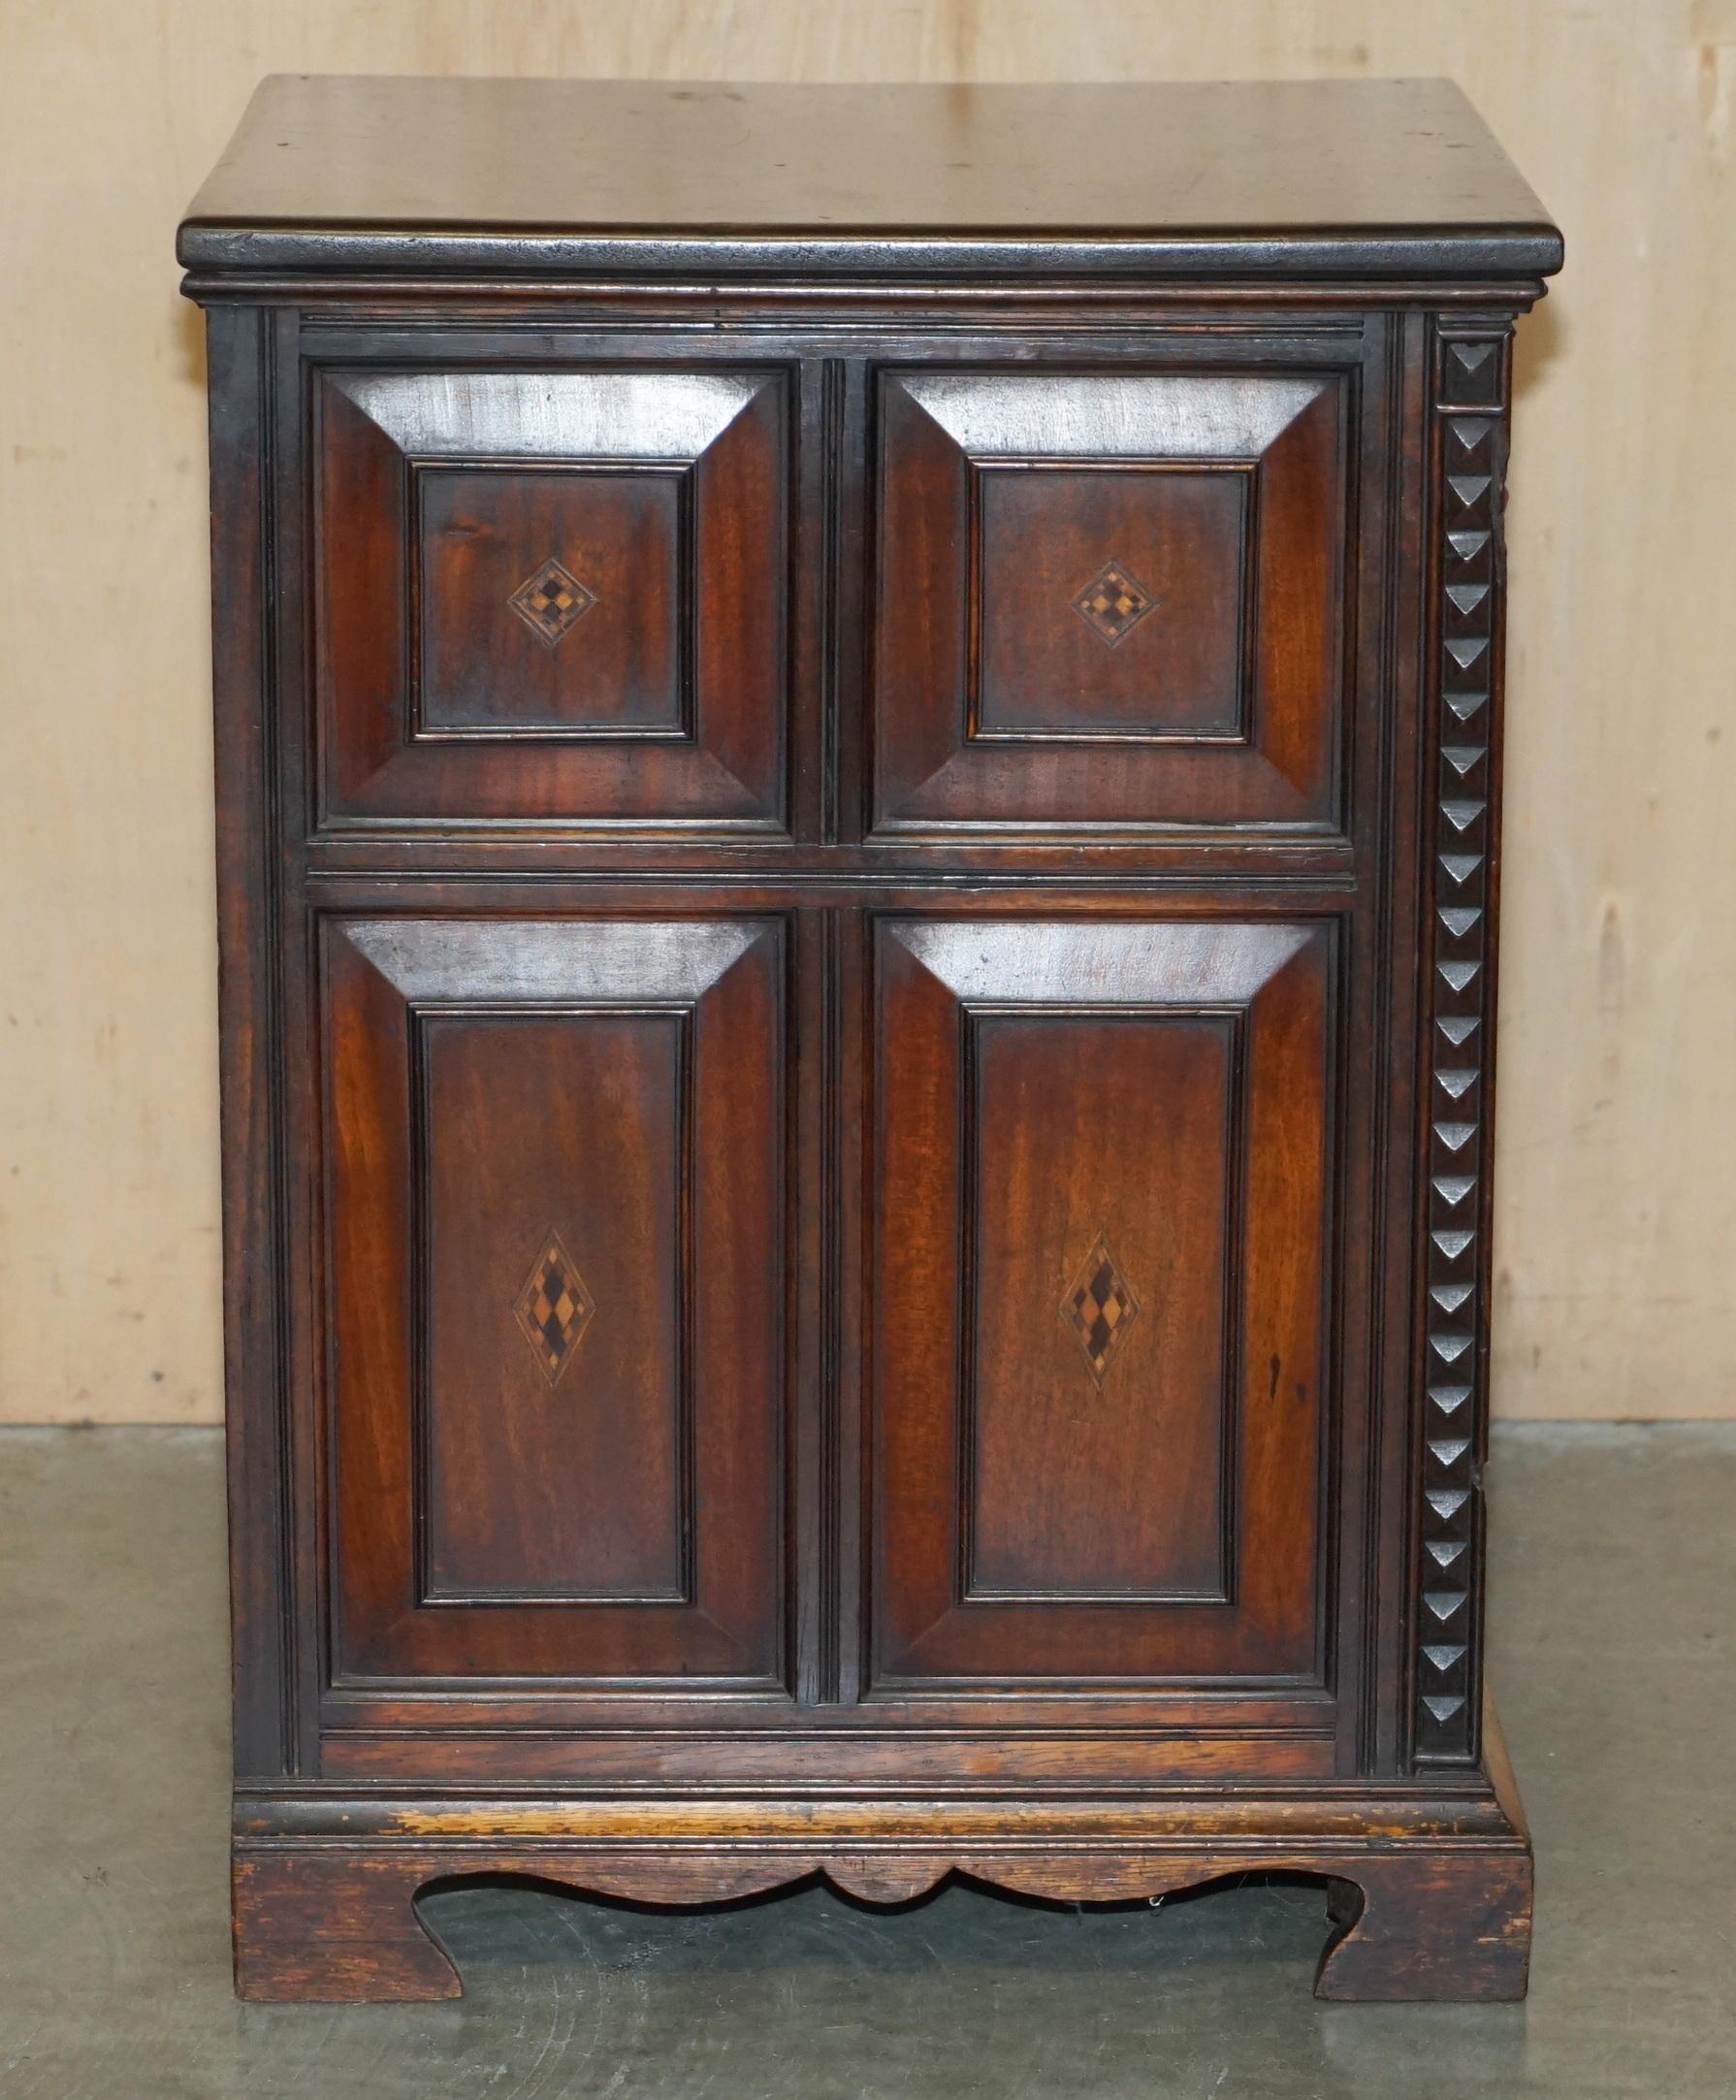 LOVELY FULLY RESTORED ANTIQUE JACOBEAN REVIVAL HAND CARVED SIDEBOARD CUPBOARD CUPBOARDs im Angebot 8